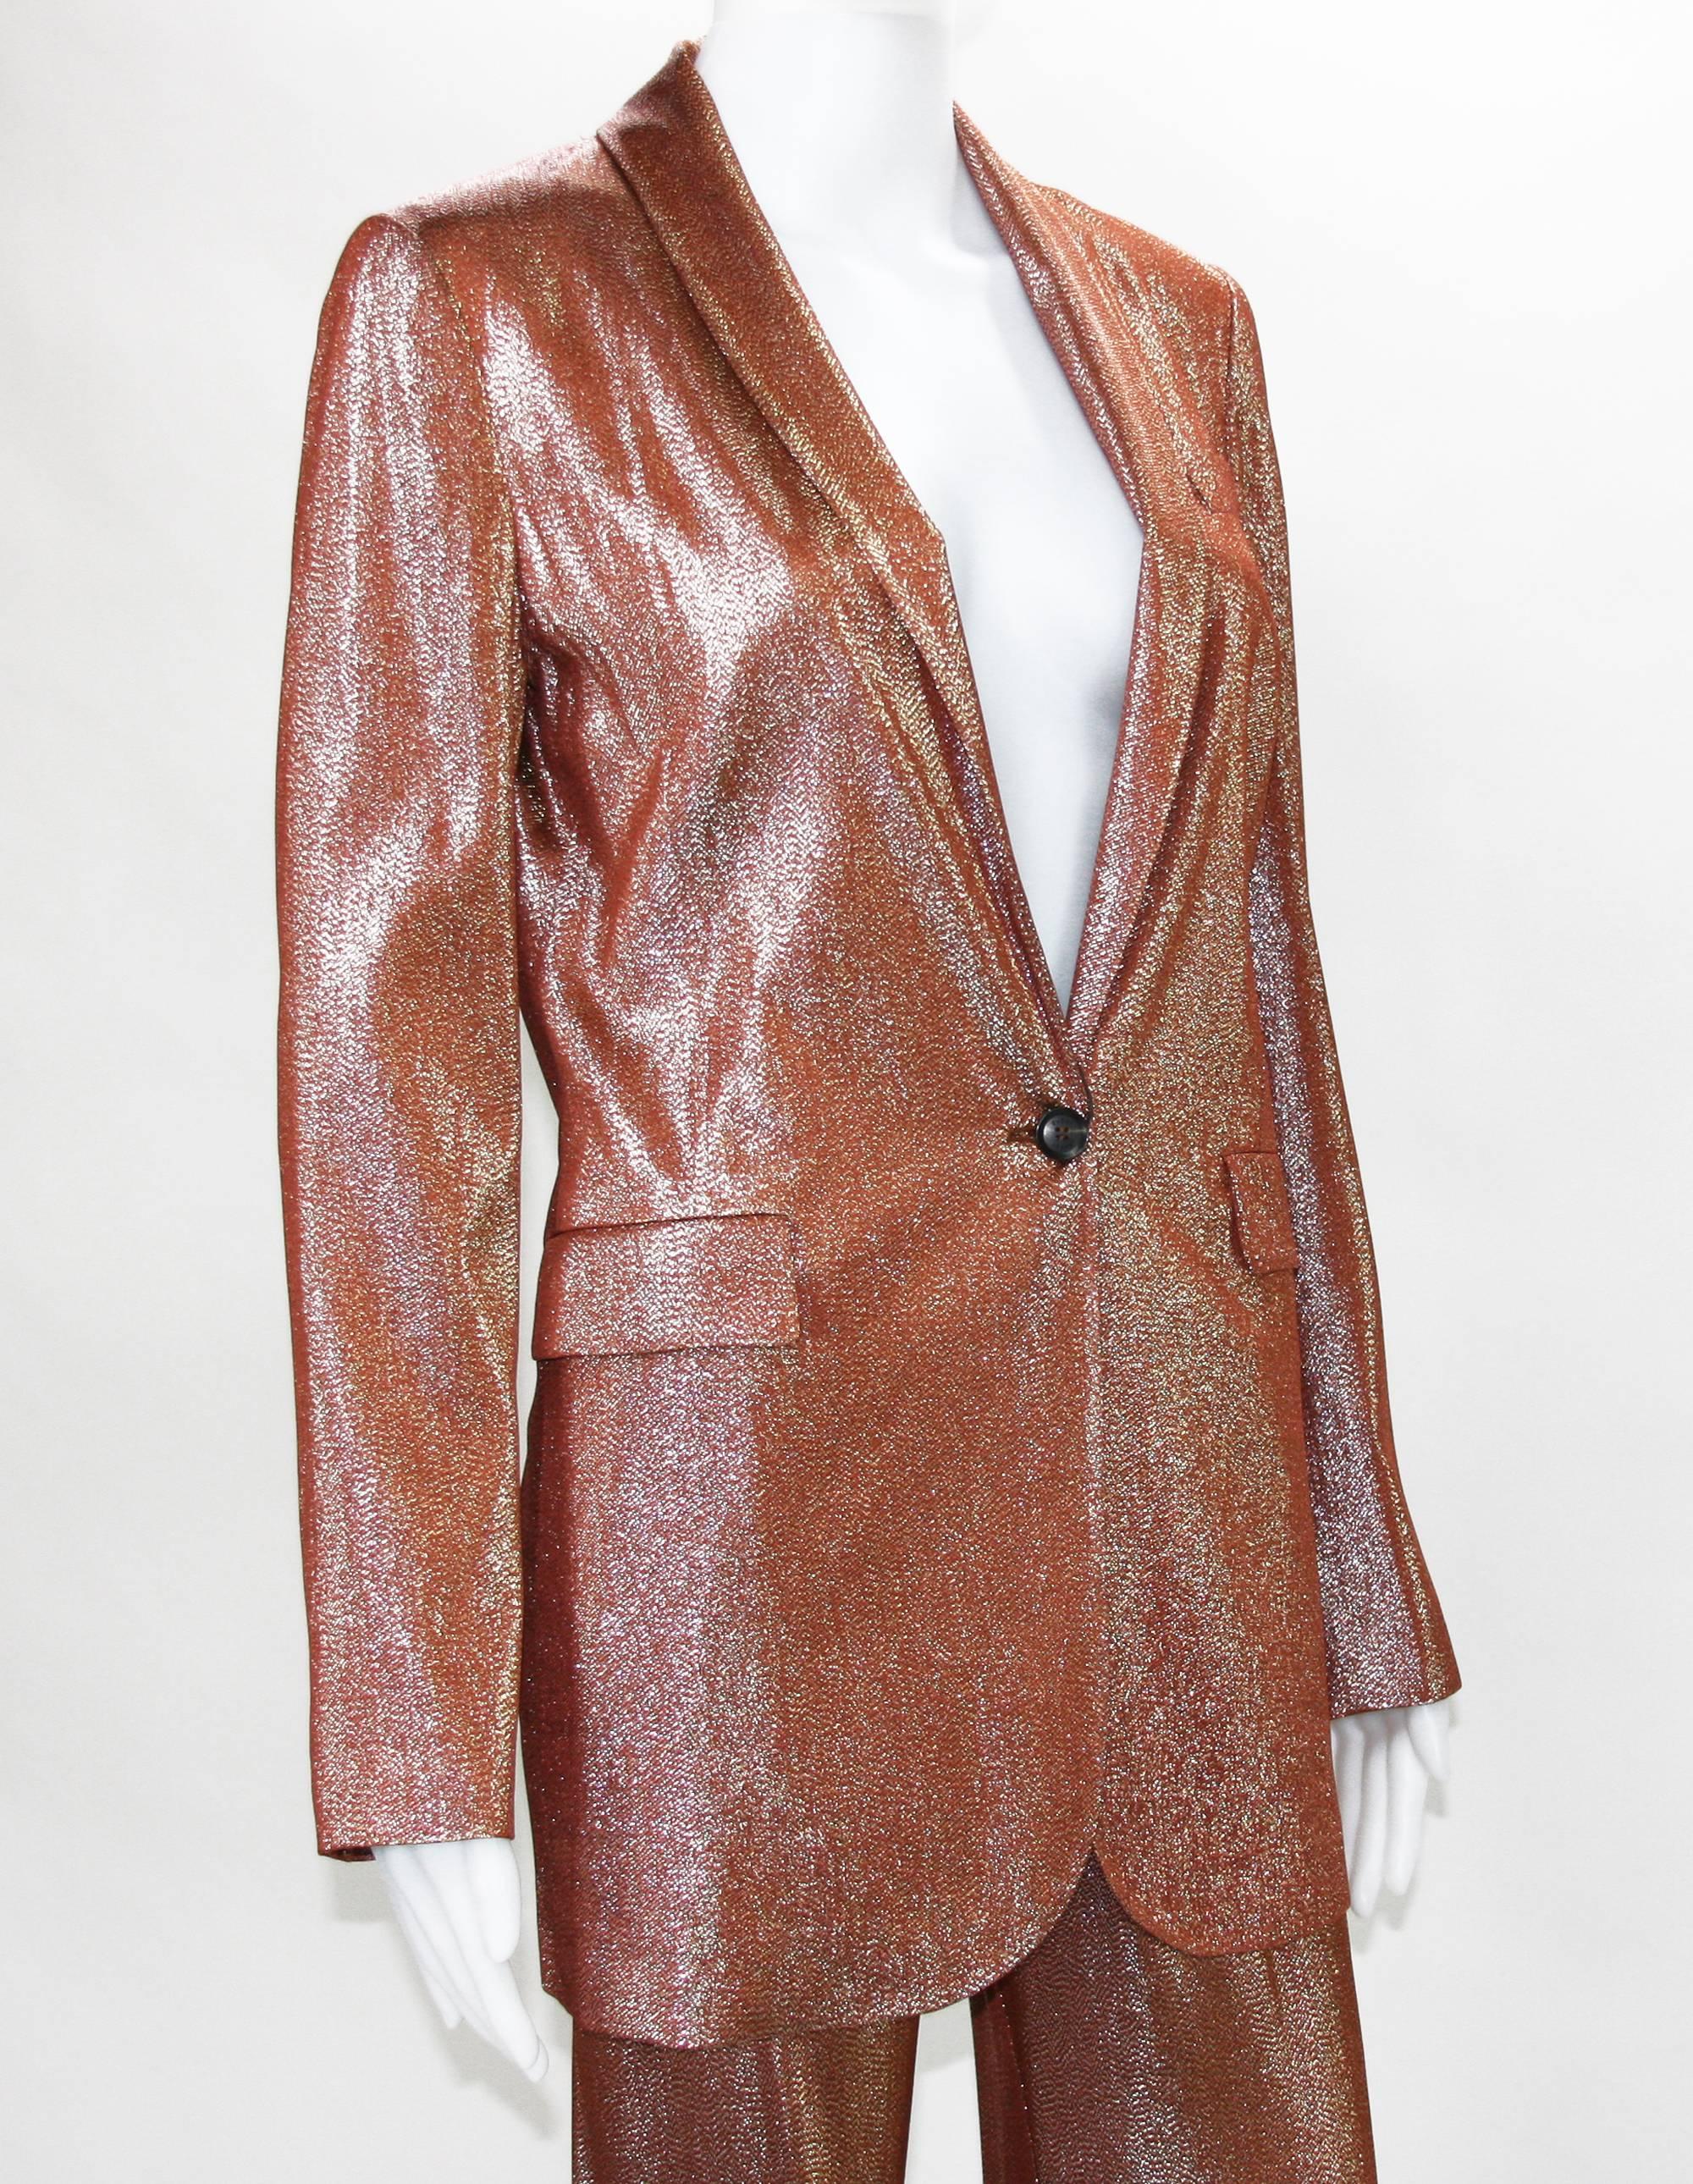 New Runway GUCCI Suit Iridescent Rust Liquid Lame Jacket & Pants sizes 38 and 40 3